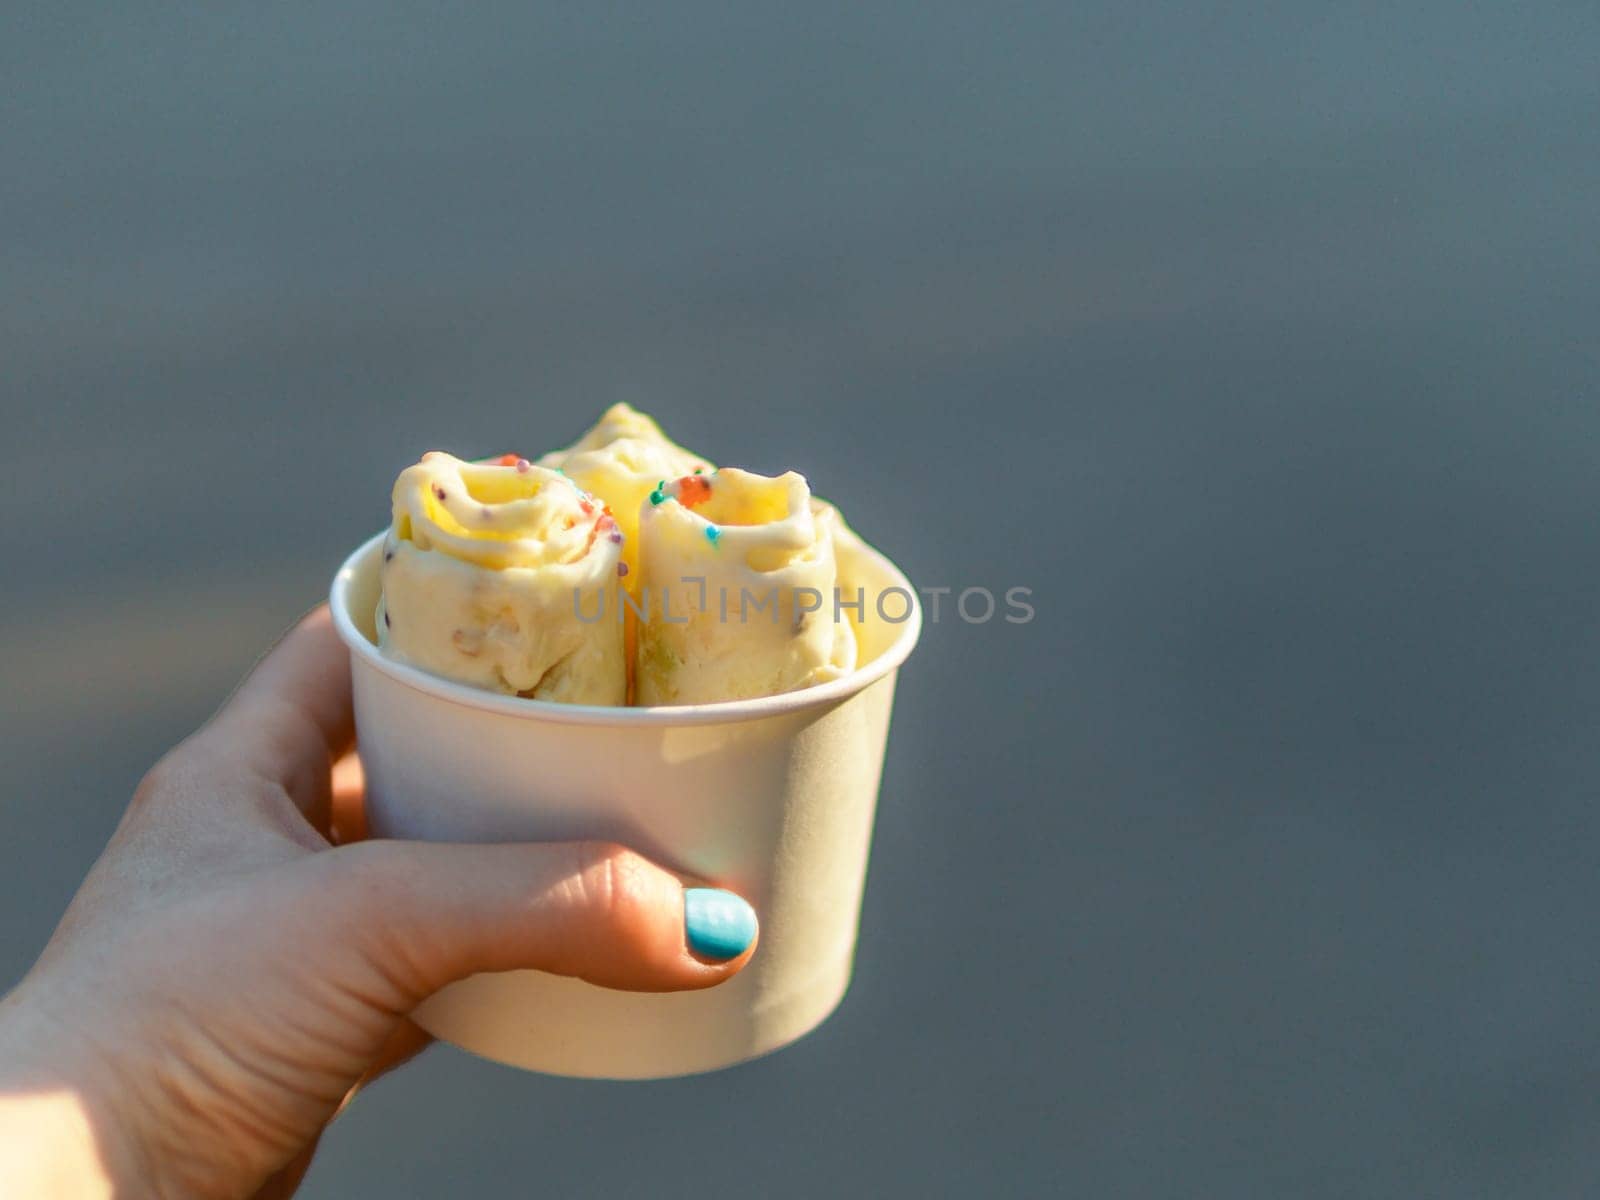 Rolled ice cream in cone cup in woman hand. Woman holds cone cup with thai style kiwi banana rolled ice cream. Outdoor. Natural hard daylight. Copy space right.